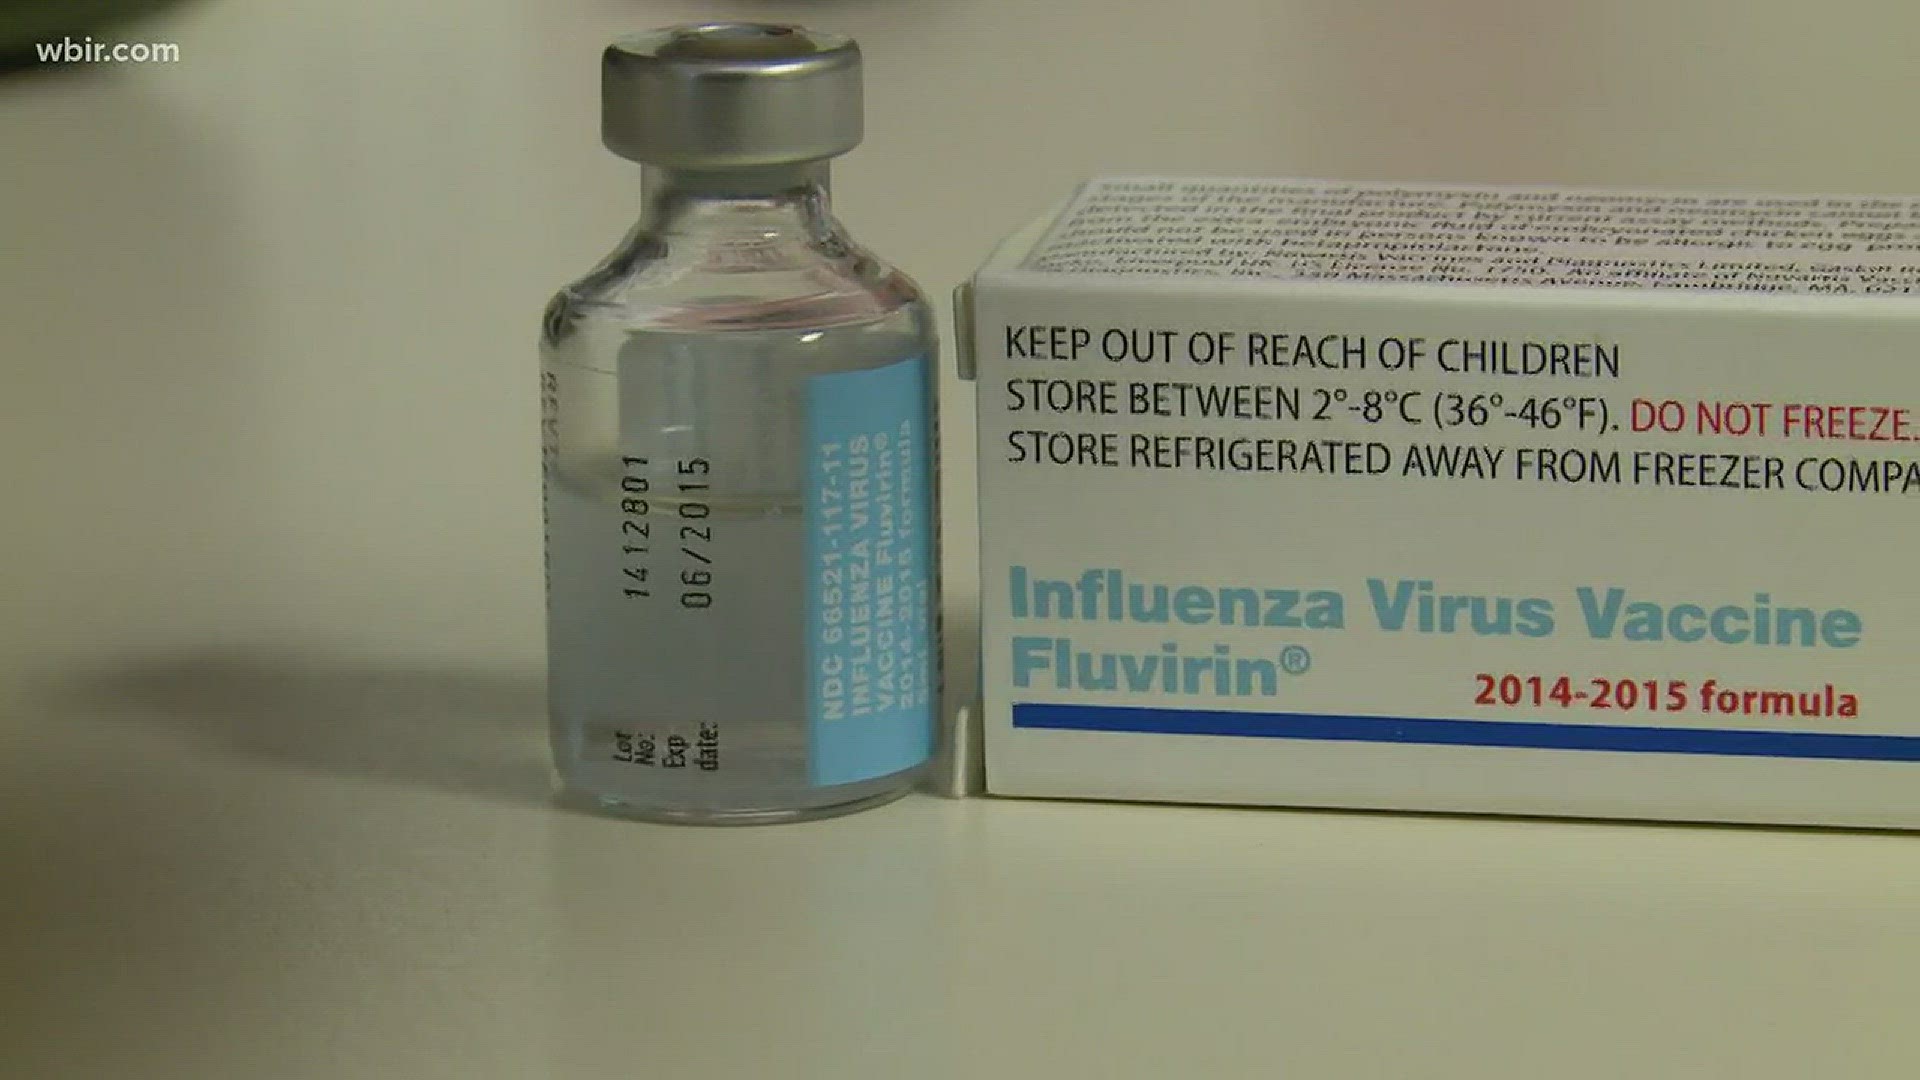 Jan. 5, 2018: The Flu is now widespread across Tennessee. The state has seen three child flu deaths so far this season.